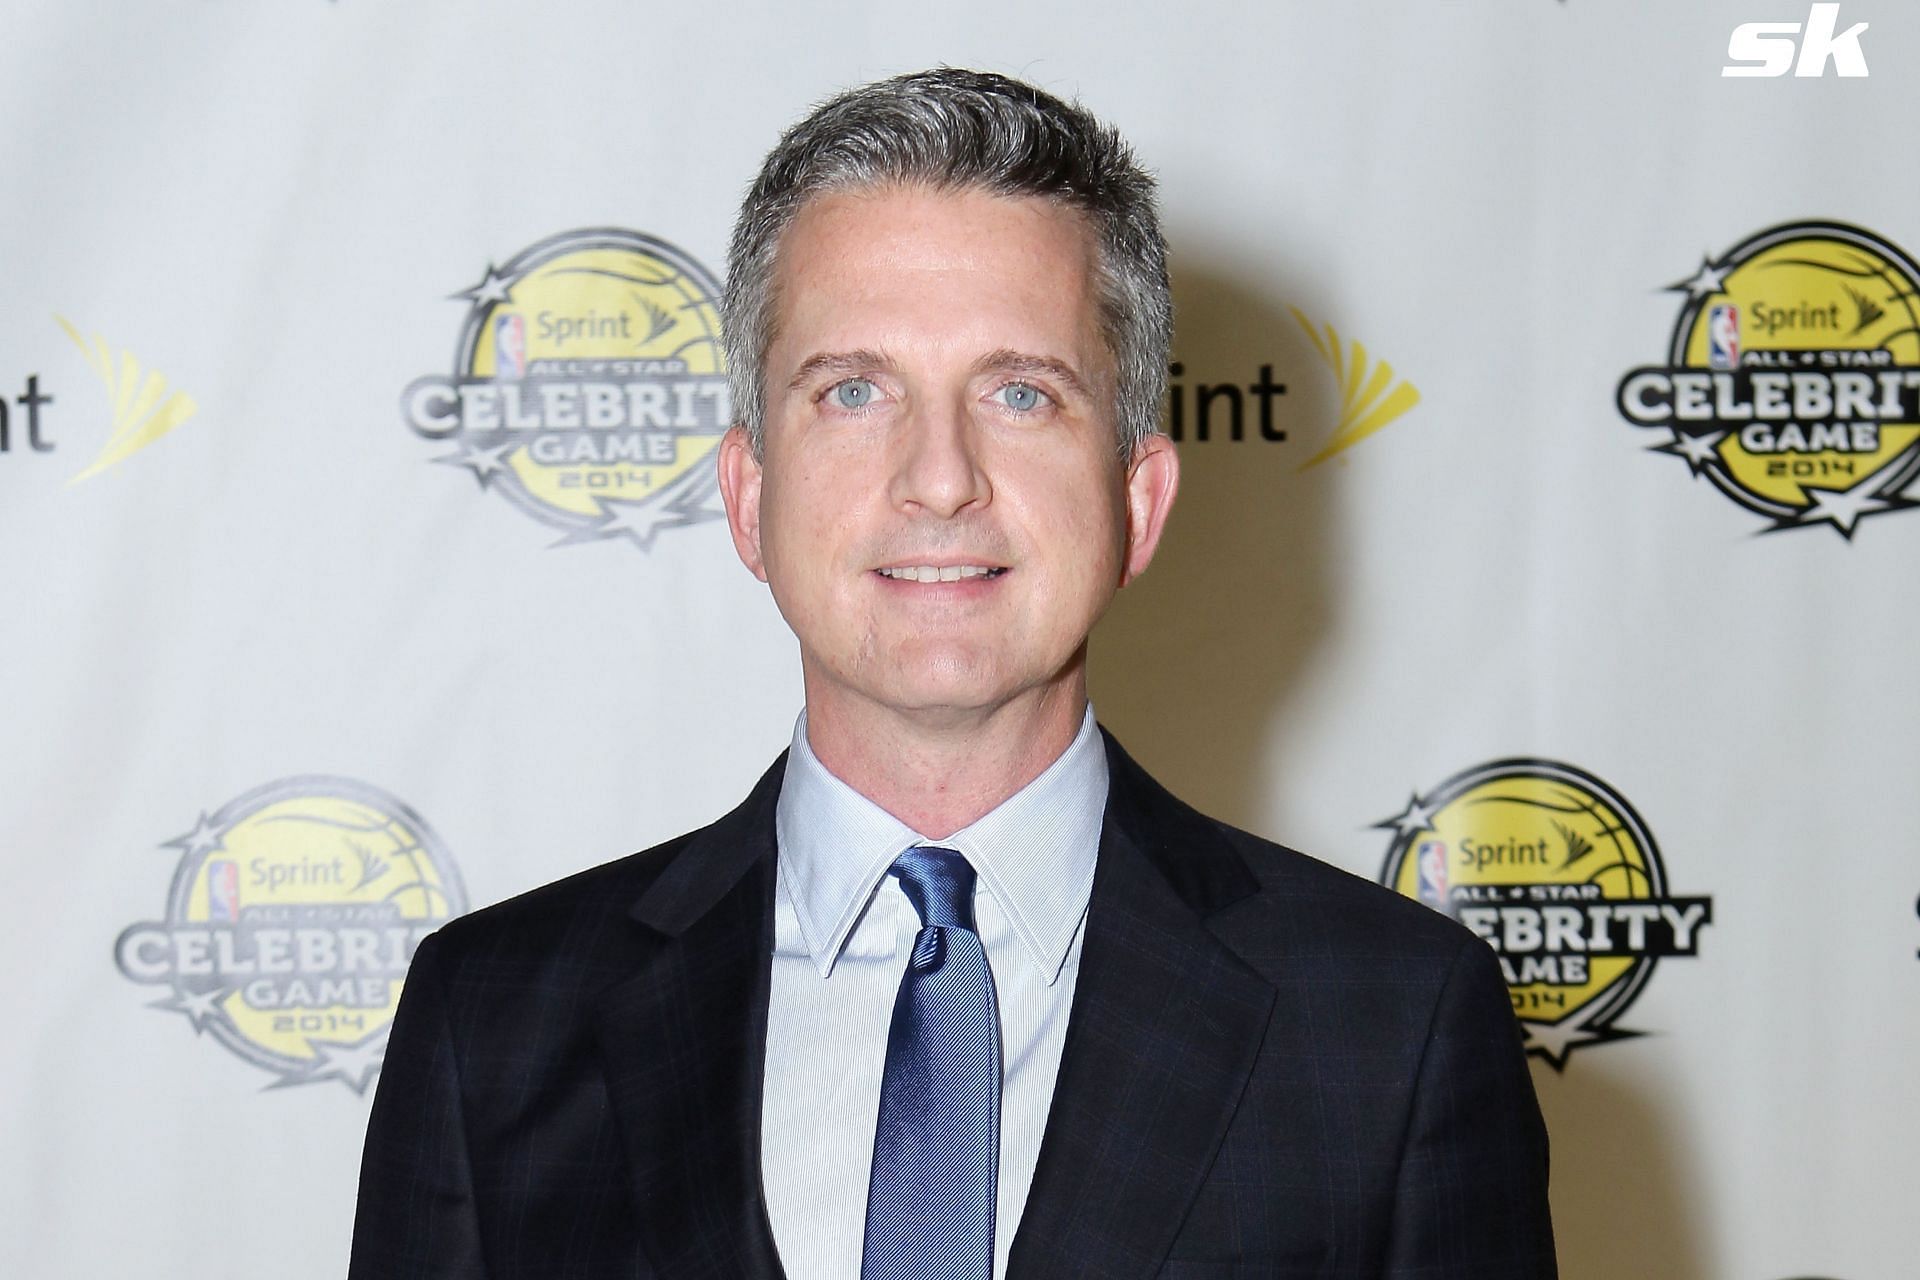 Bill Simmons has asked the fans not to overreact  regarding recent scandals.